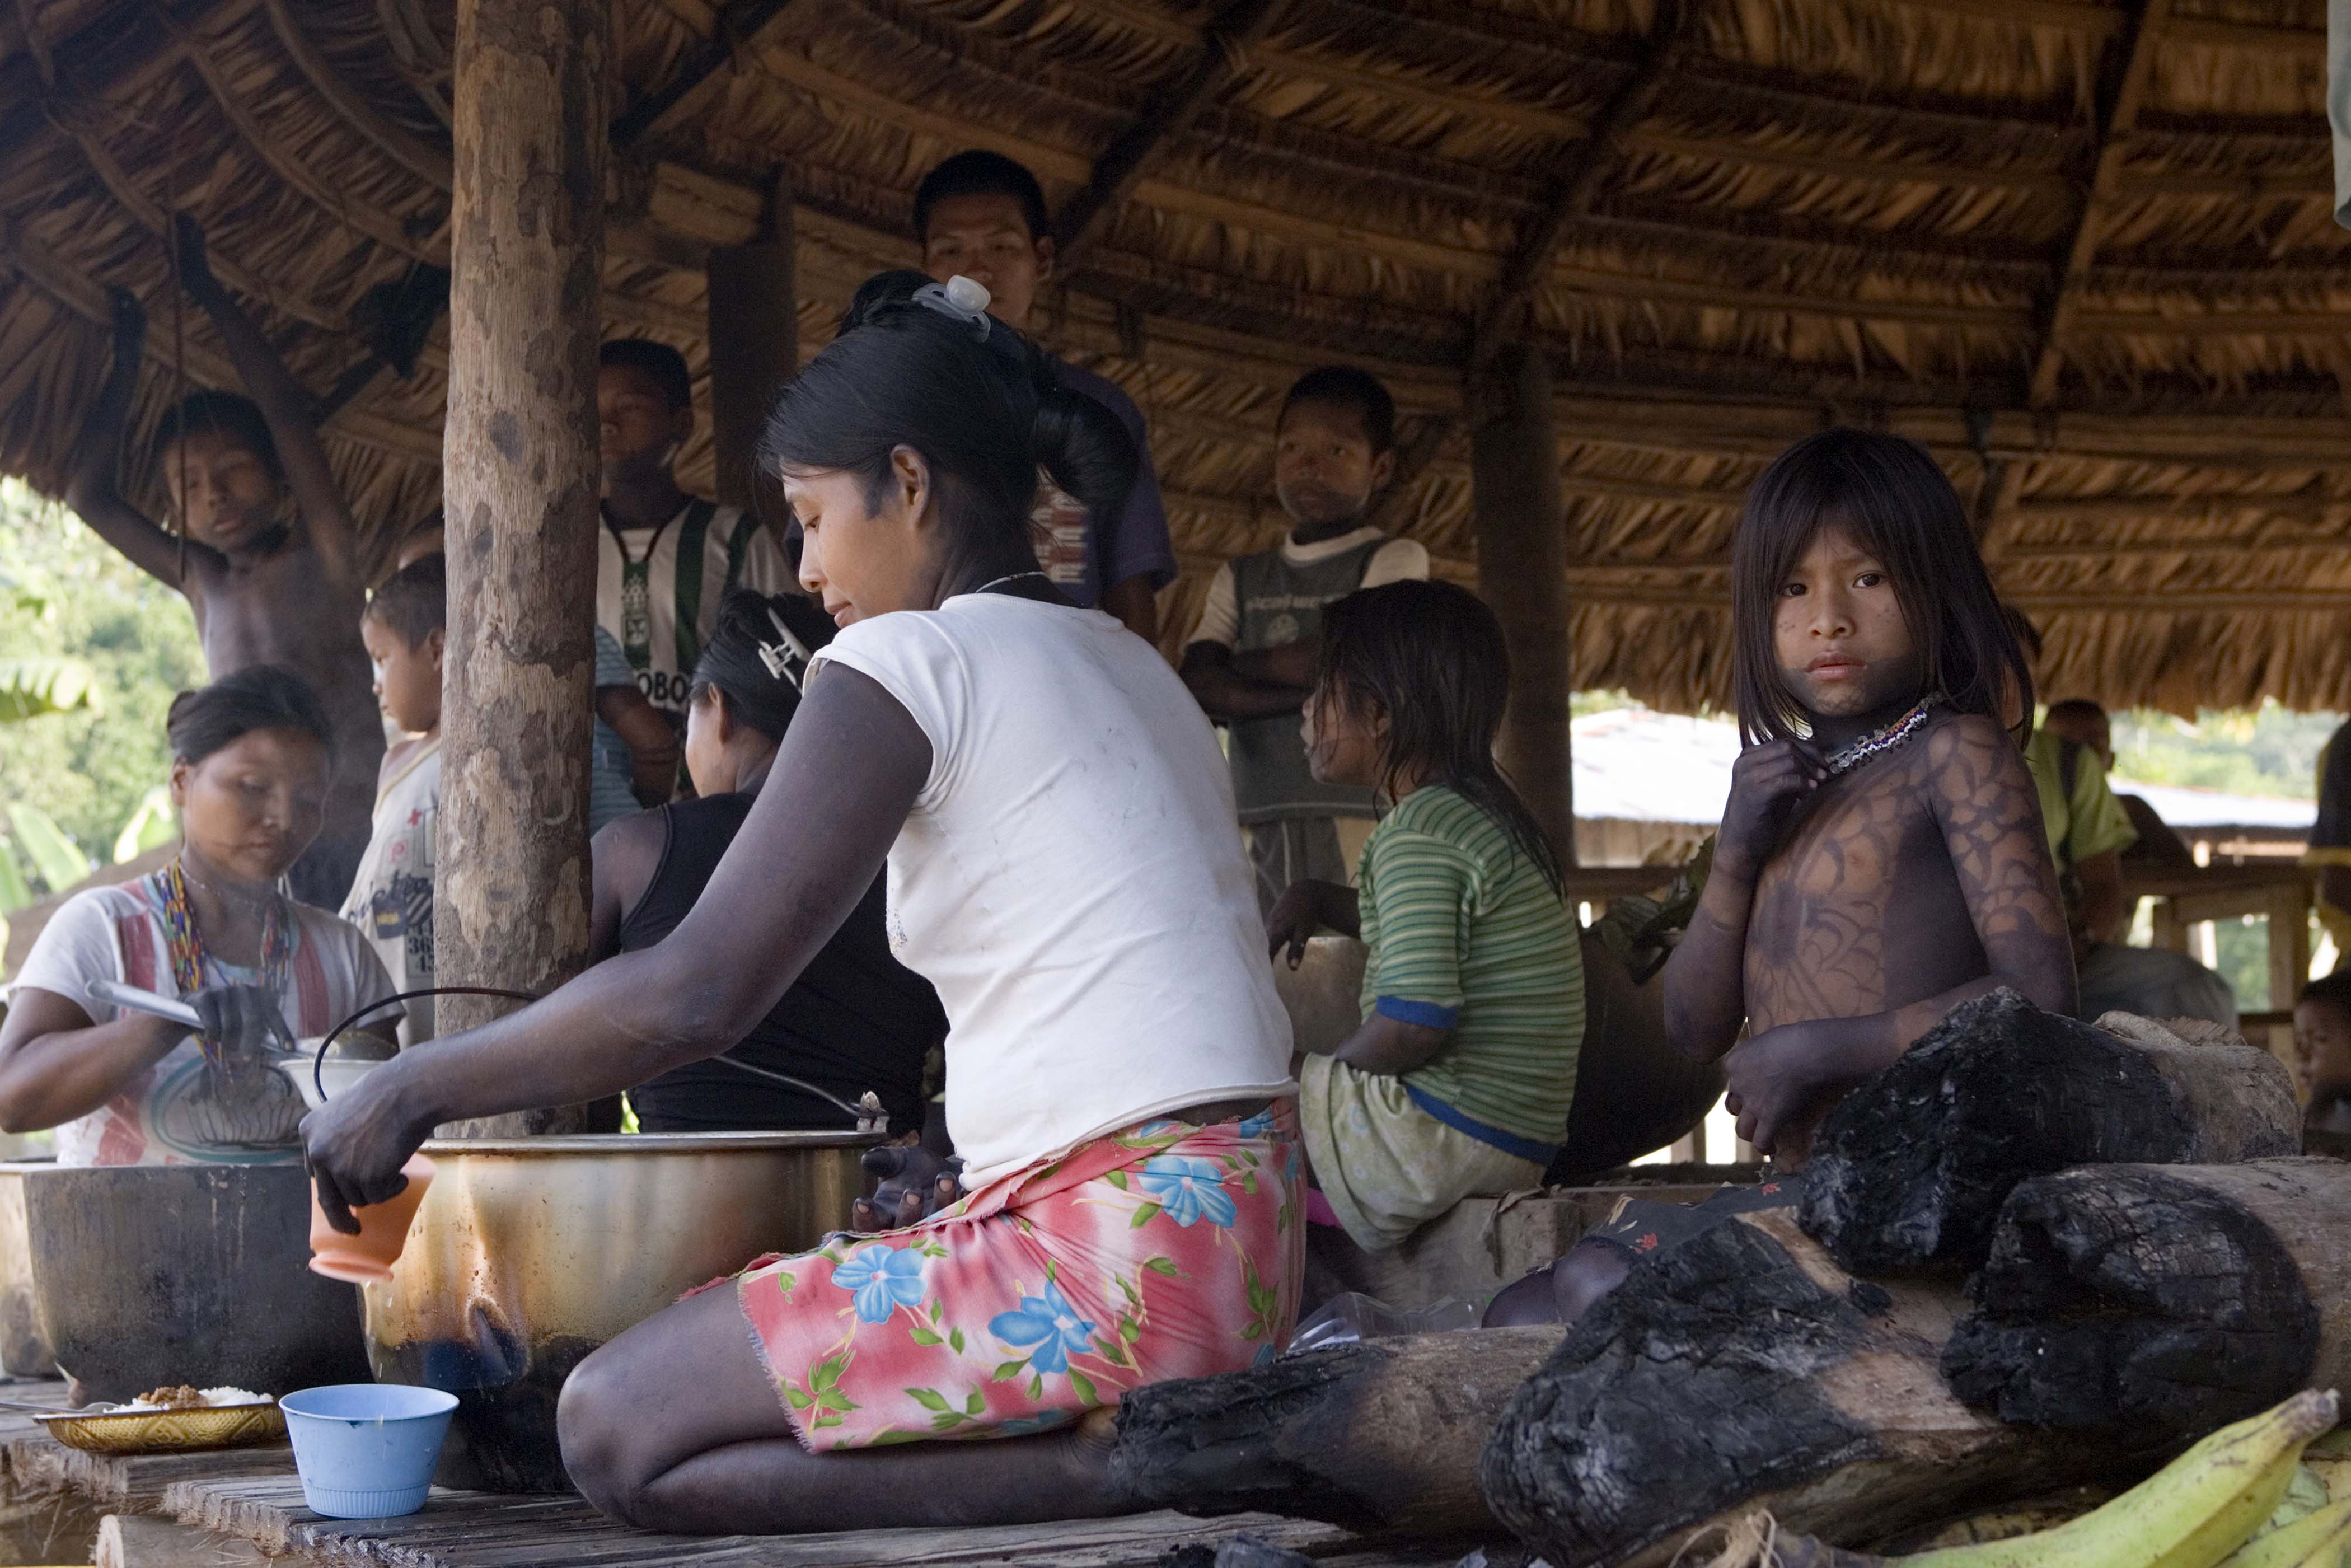 A woman cooks in a pot surrounded by young children who are watching her cook. They are all sitting in a hut.